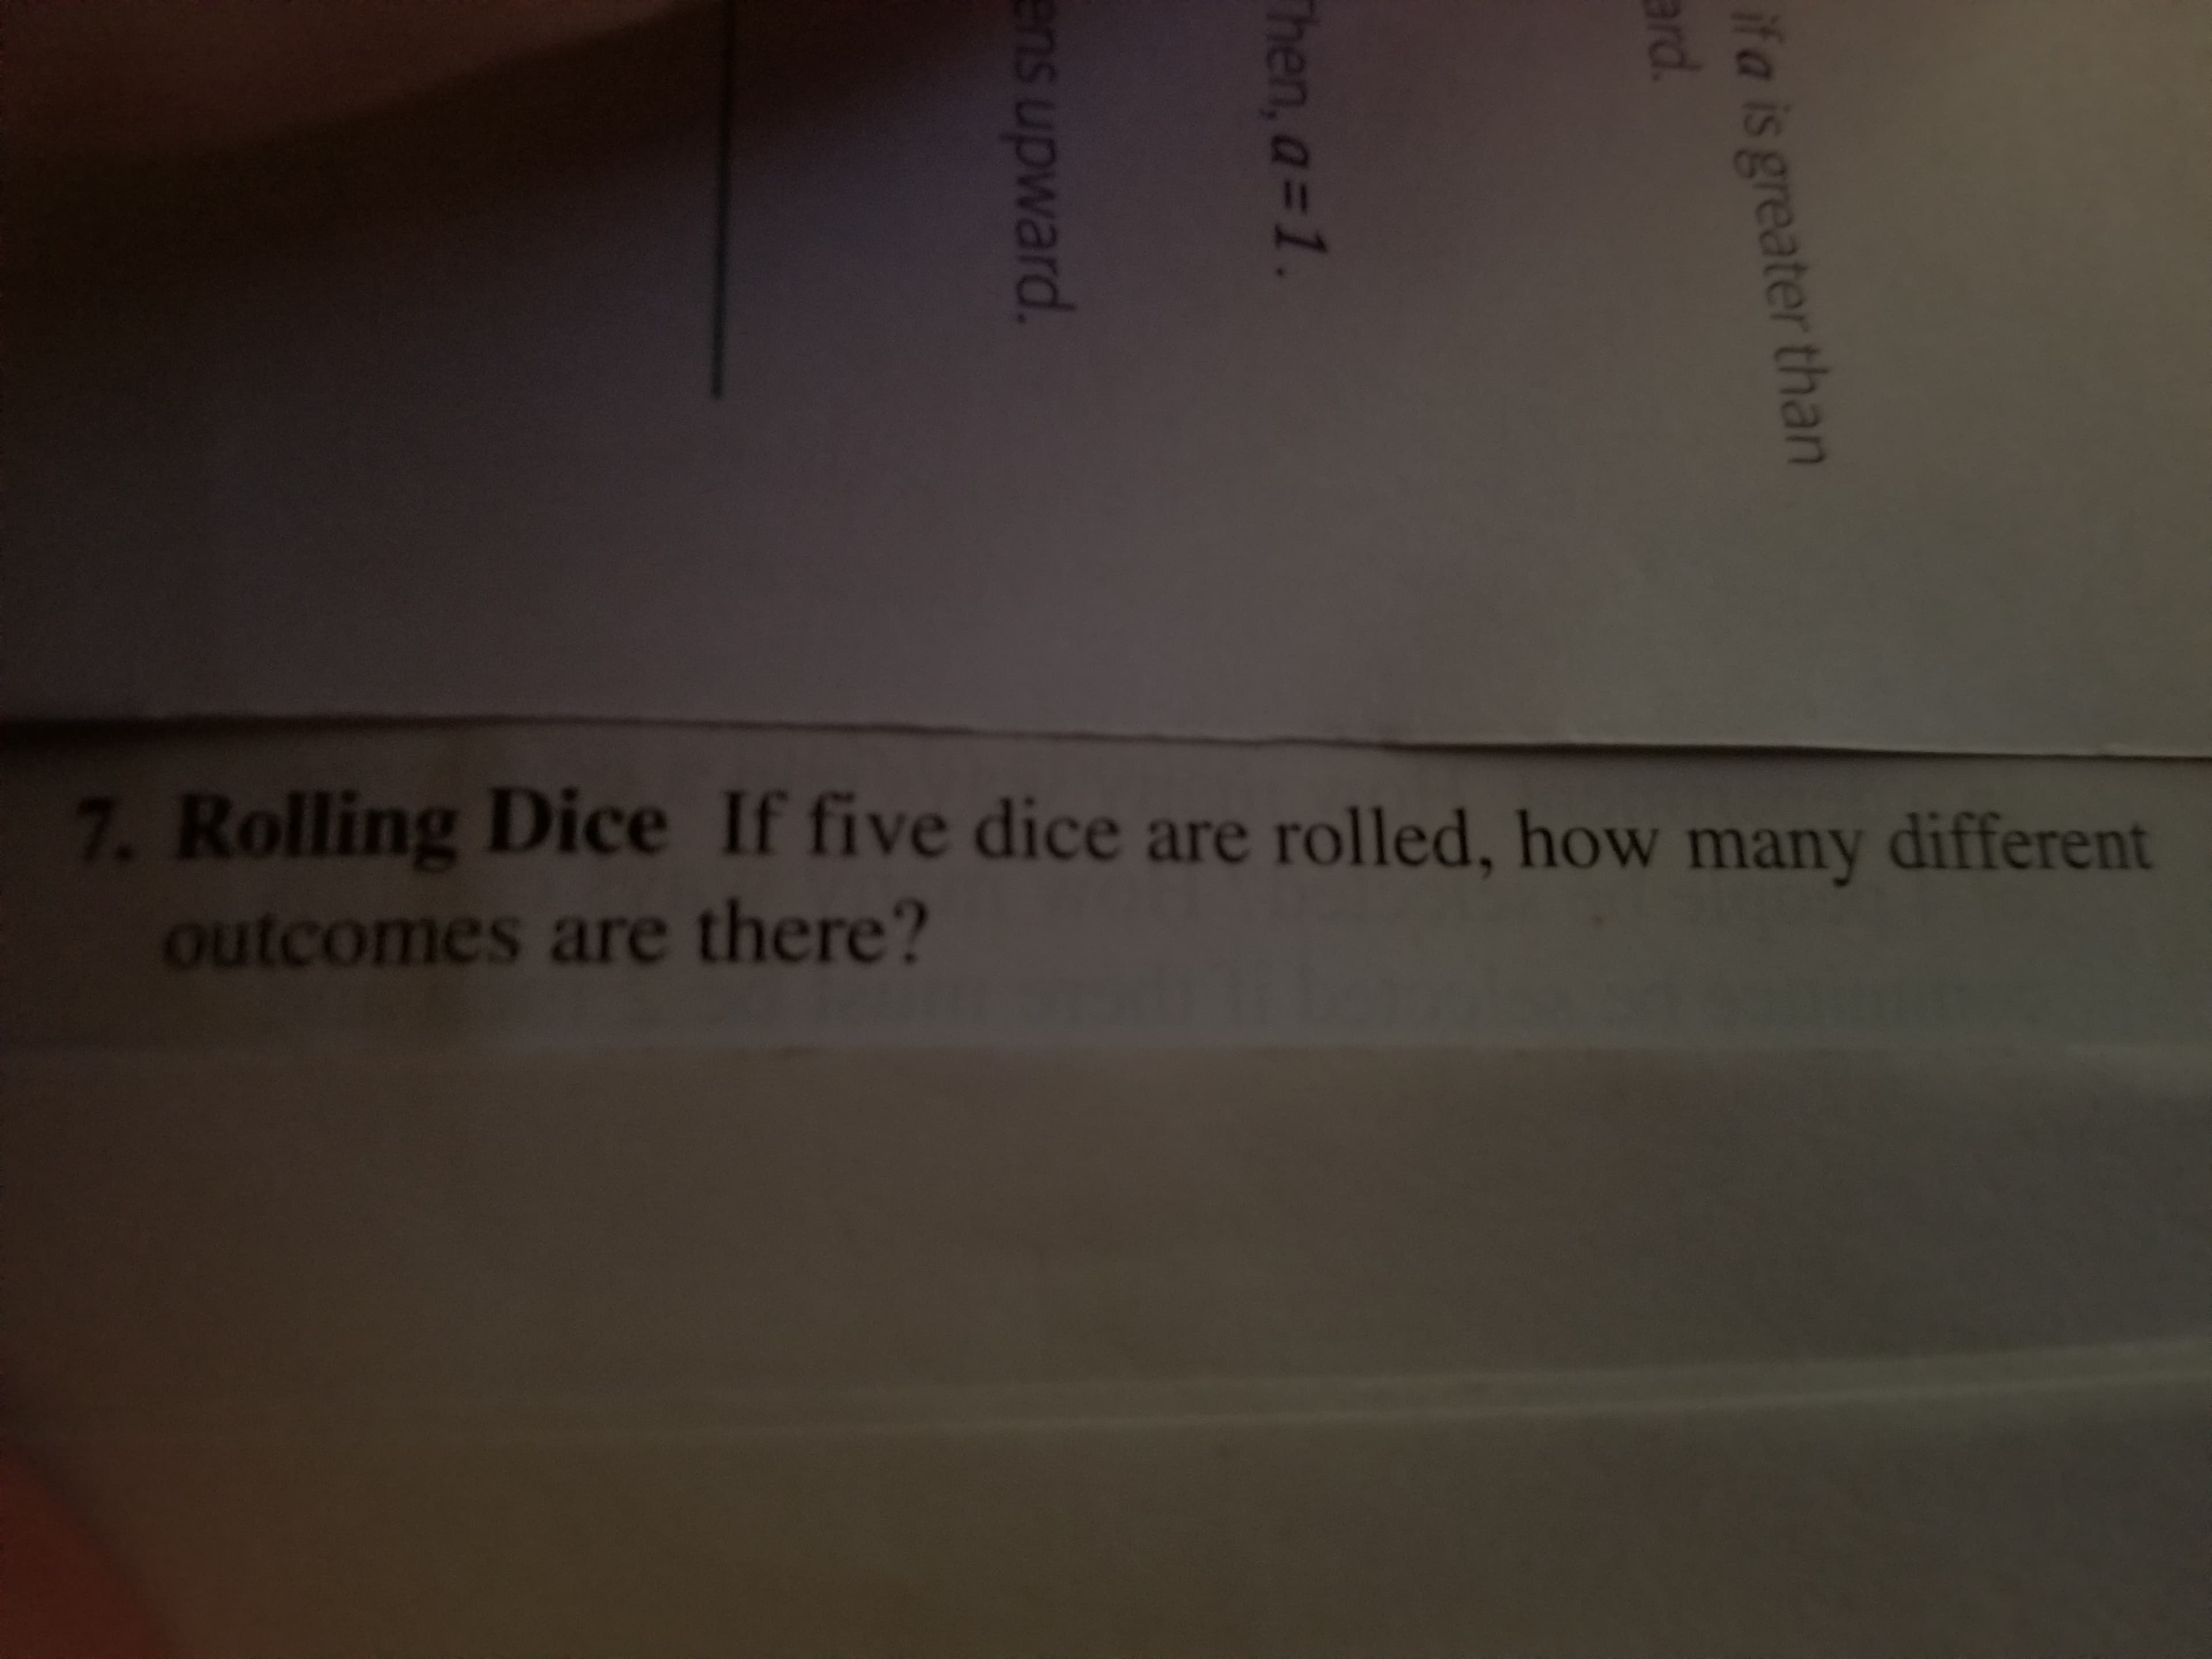 7. Rolling Dice If five dice are rolled, how many different
outcomes are there?
